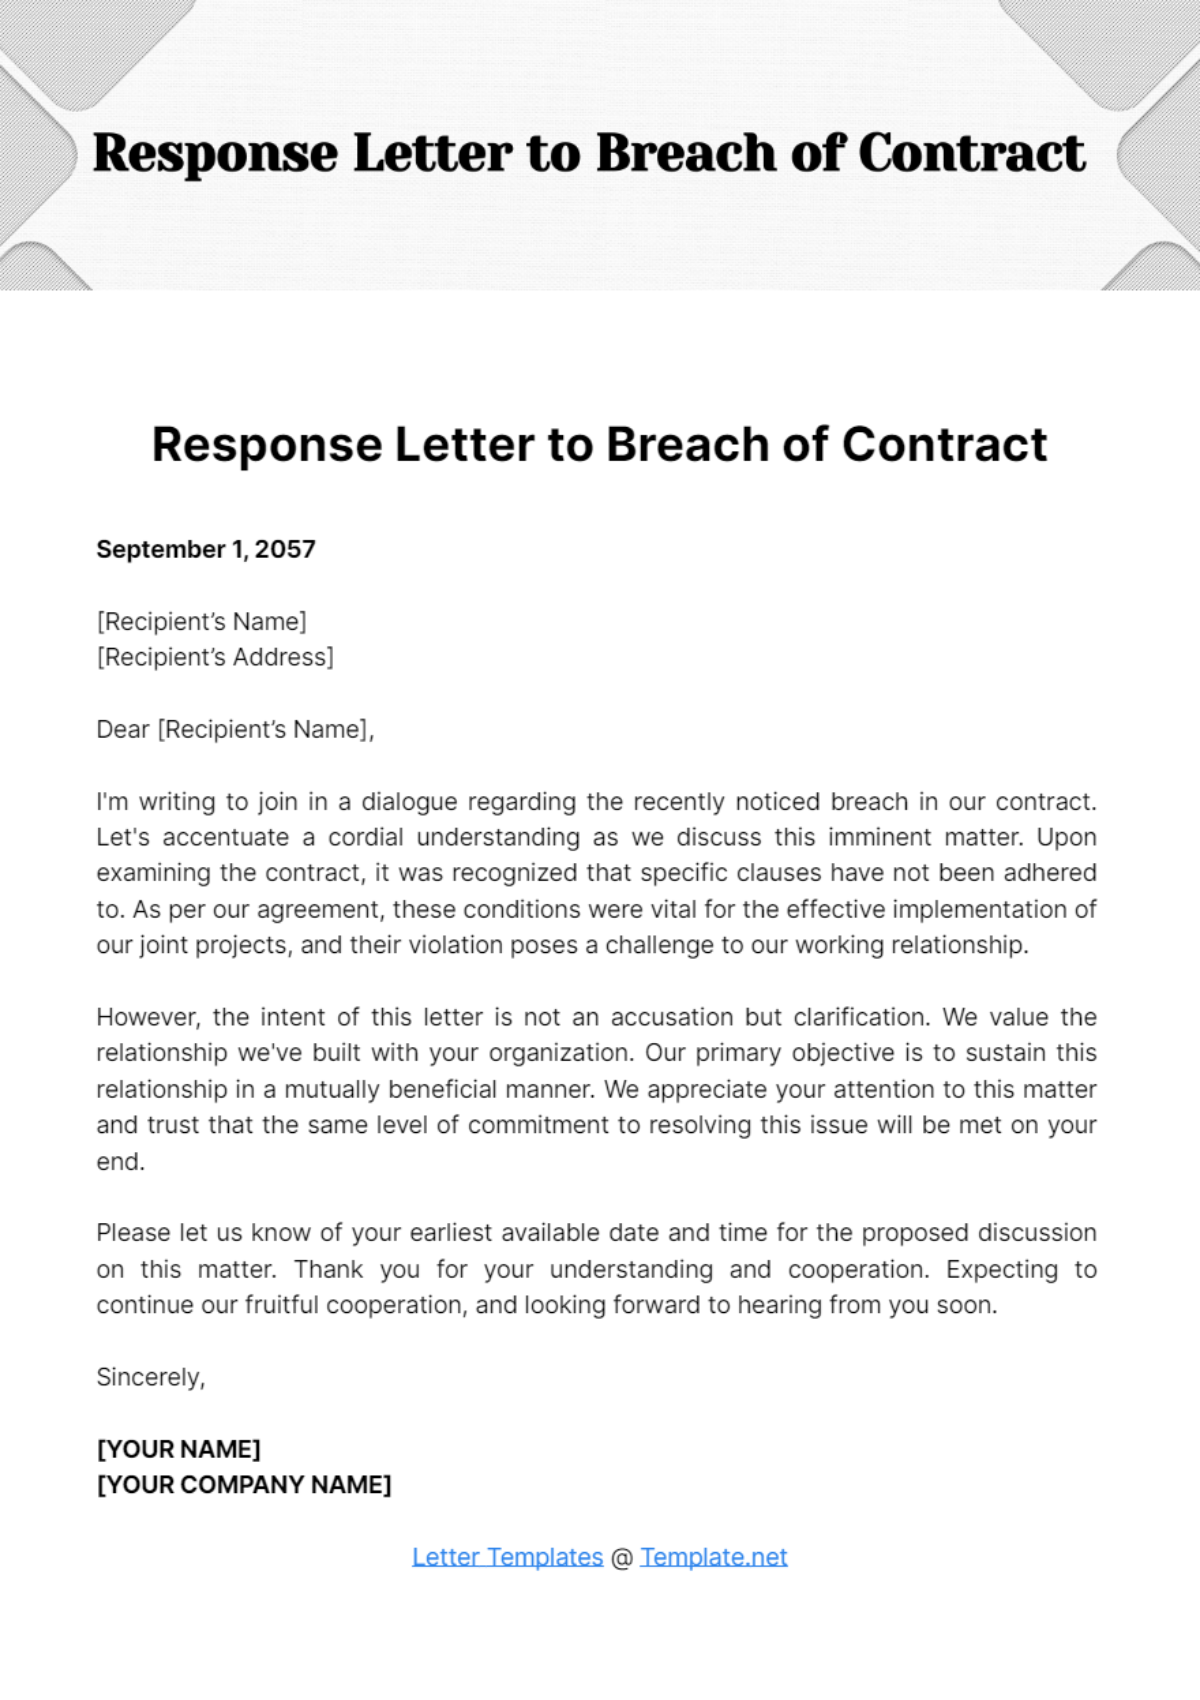 Free Response Letter to Breach of Contract Template